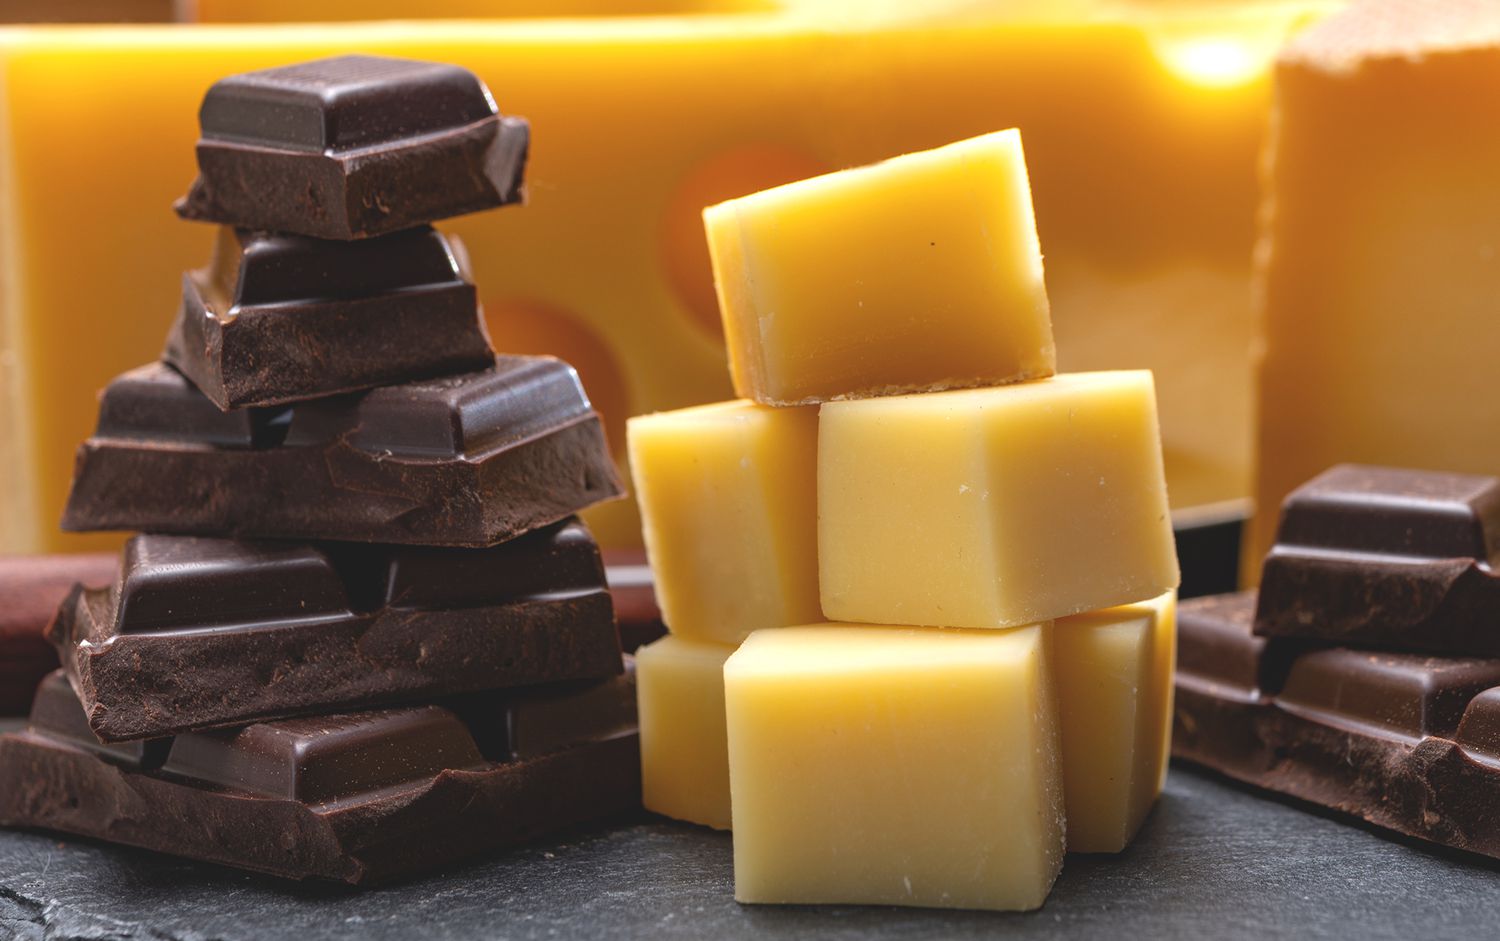 stacks of chocolate and cheese on a slate surface